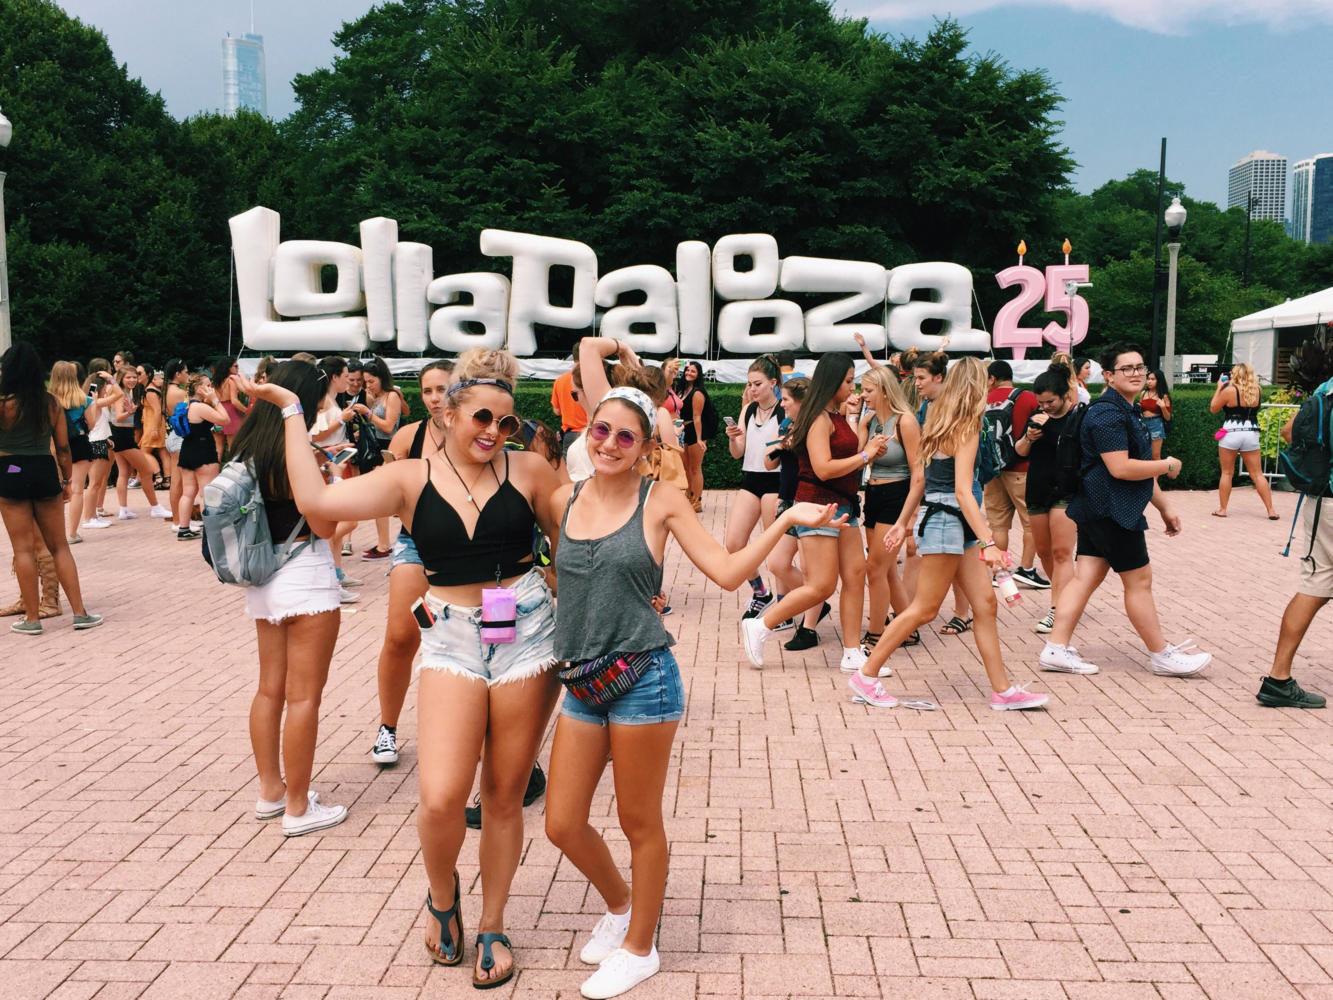 Seniors Kathryn Scott and Francesca Smith pose for a photo at the 2016 Lollapalooza festival. Scott said the festival was expensive but she made revenue by selling extra tickets.